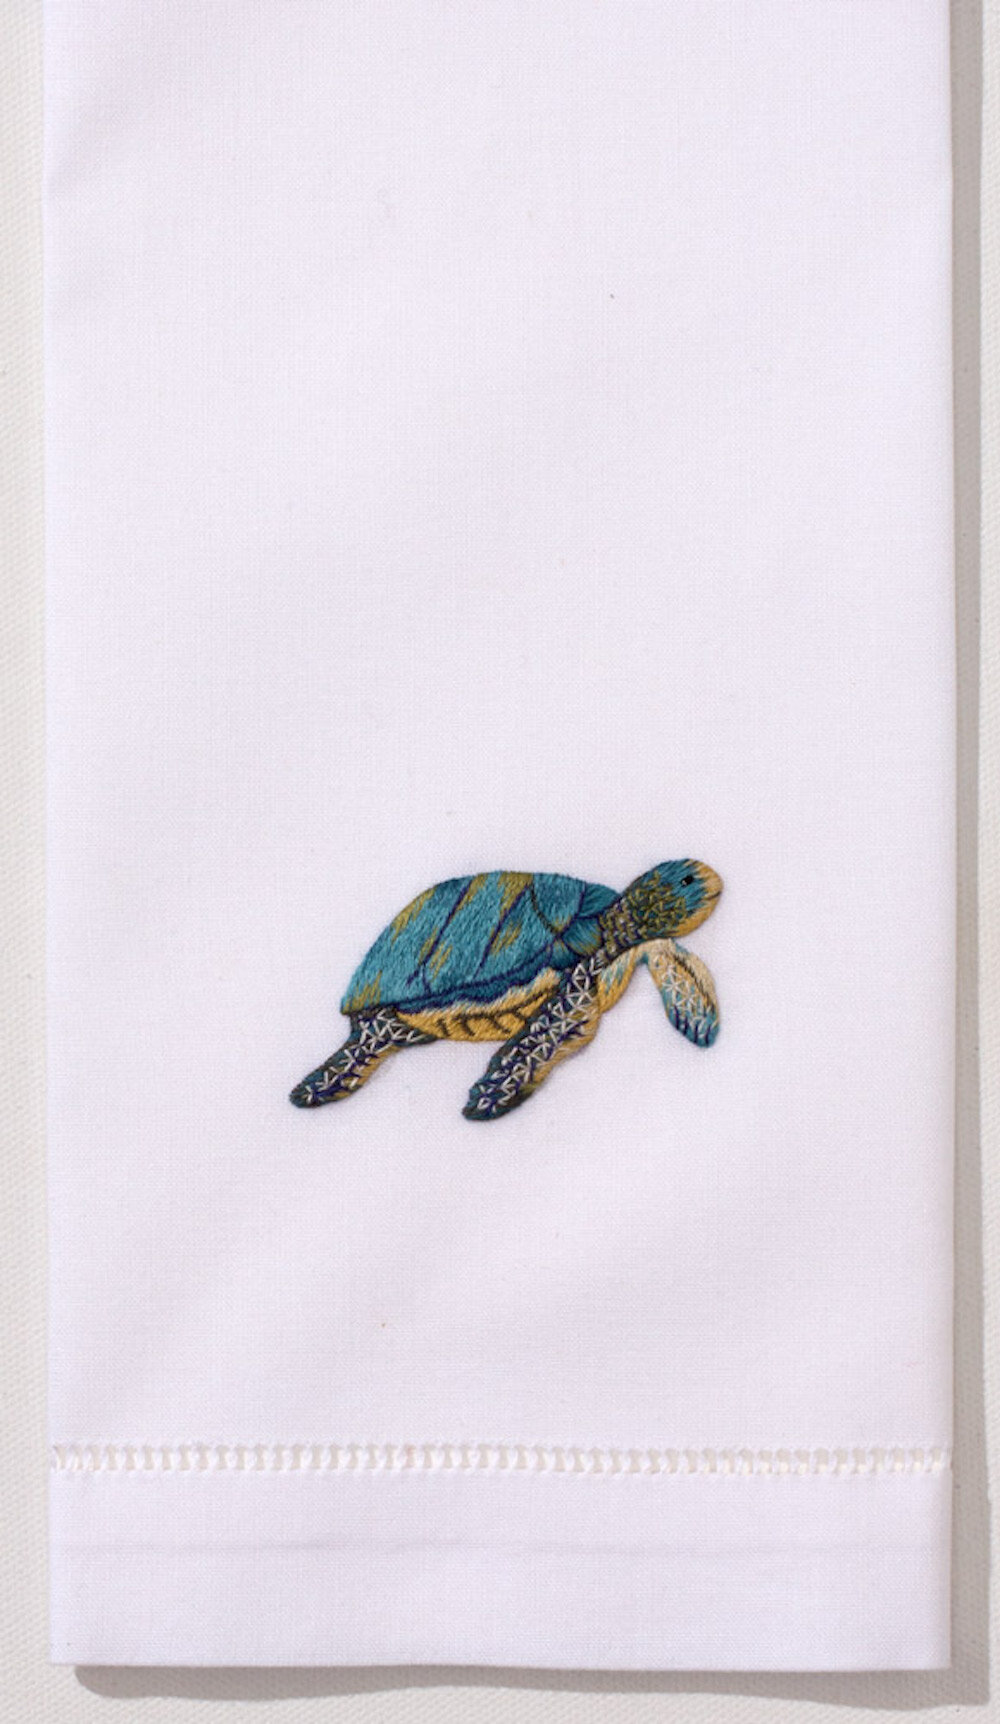 TURTLE MEDALLIAN STAINED GLASS SET OF 2 HAND TOWEL EMBROIDERED BY LAURA 